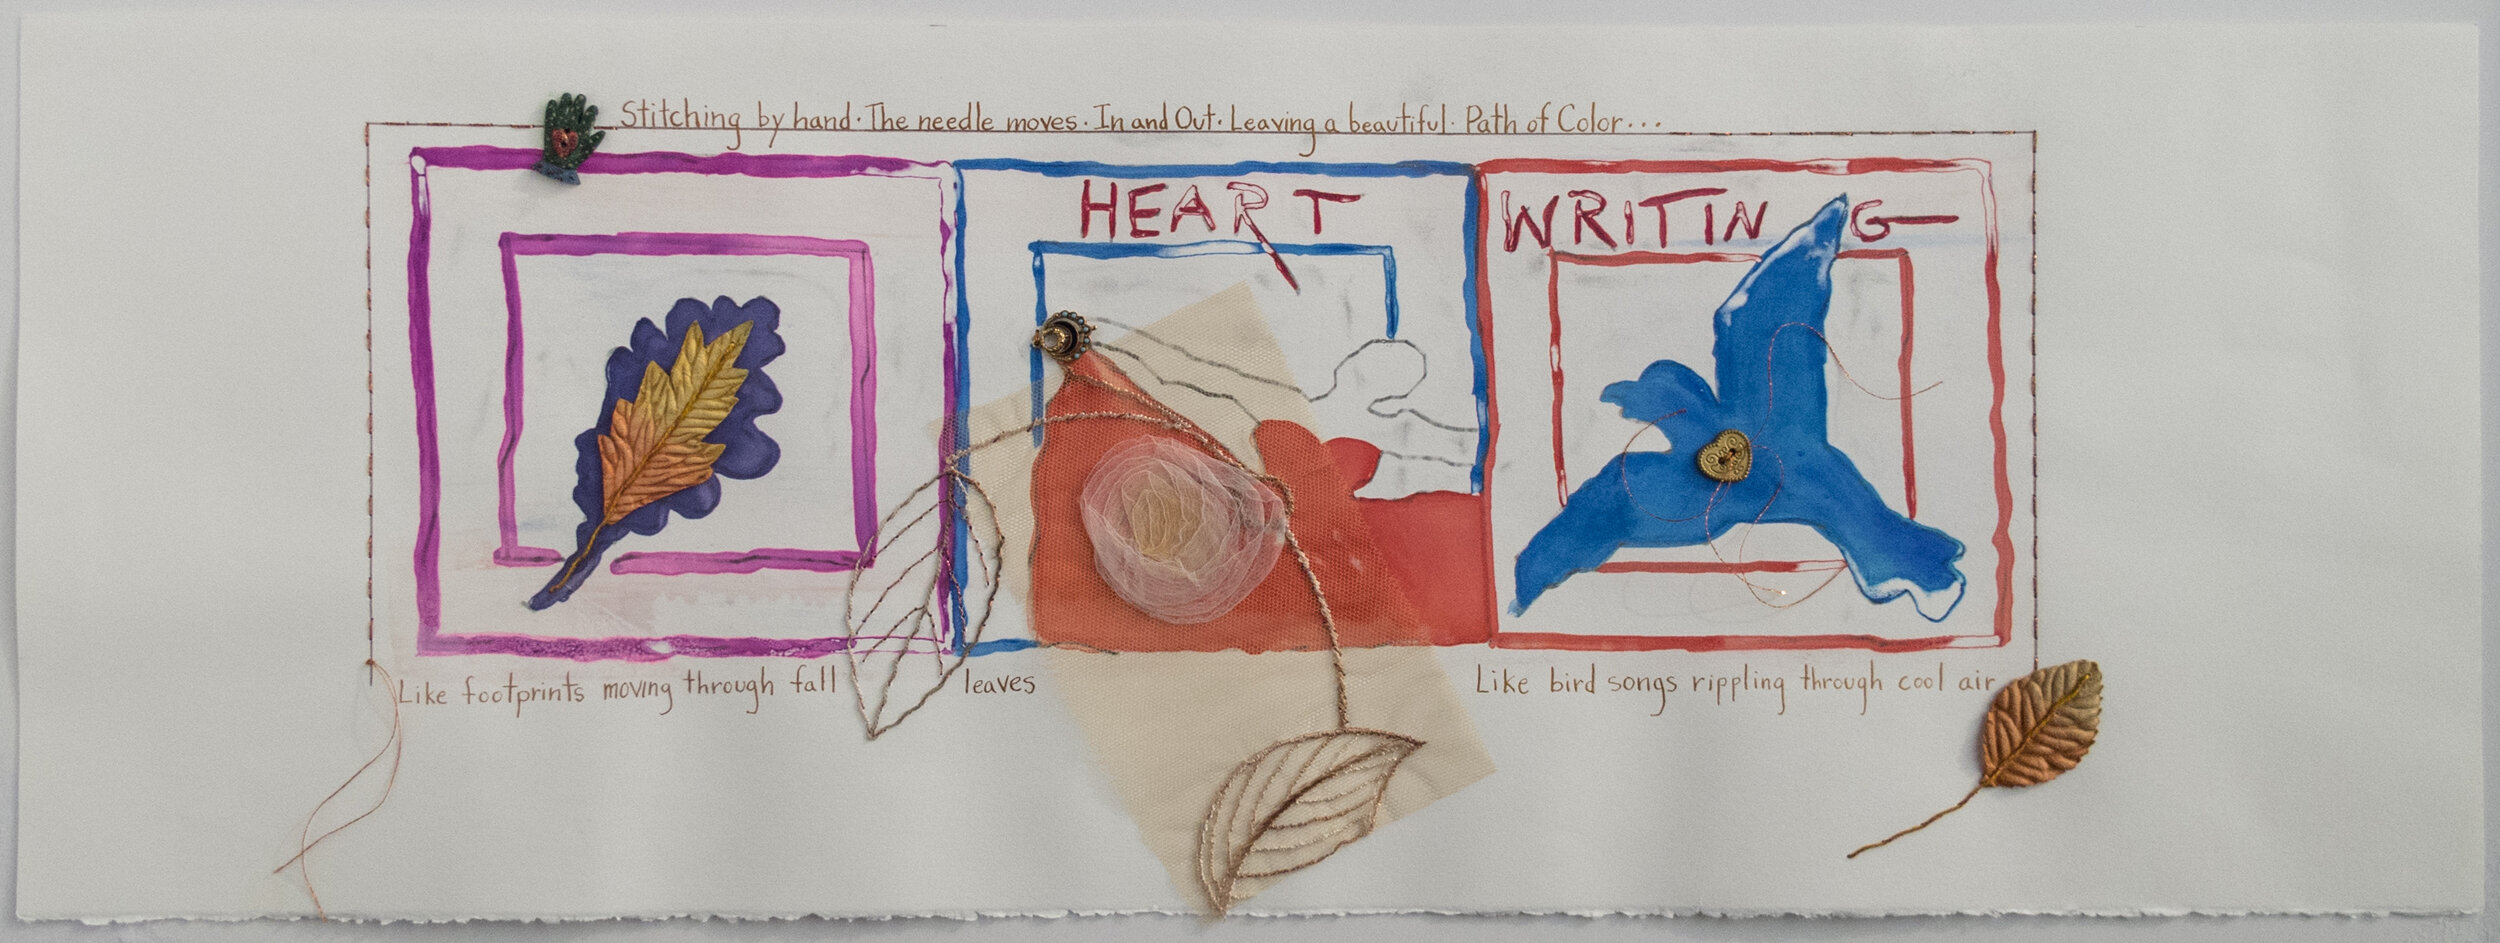 Janet Higgins; Heart Writing #1; Monotype with hand-stitching and various media 